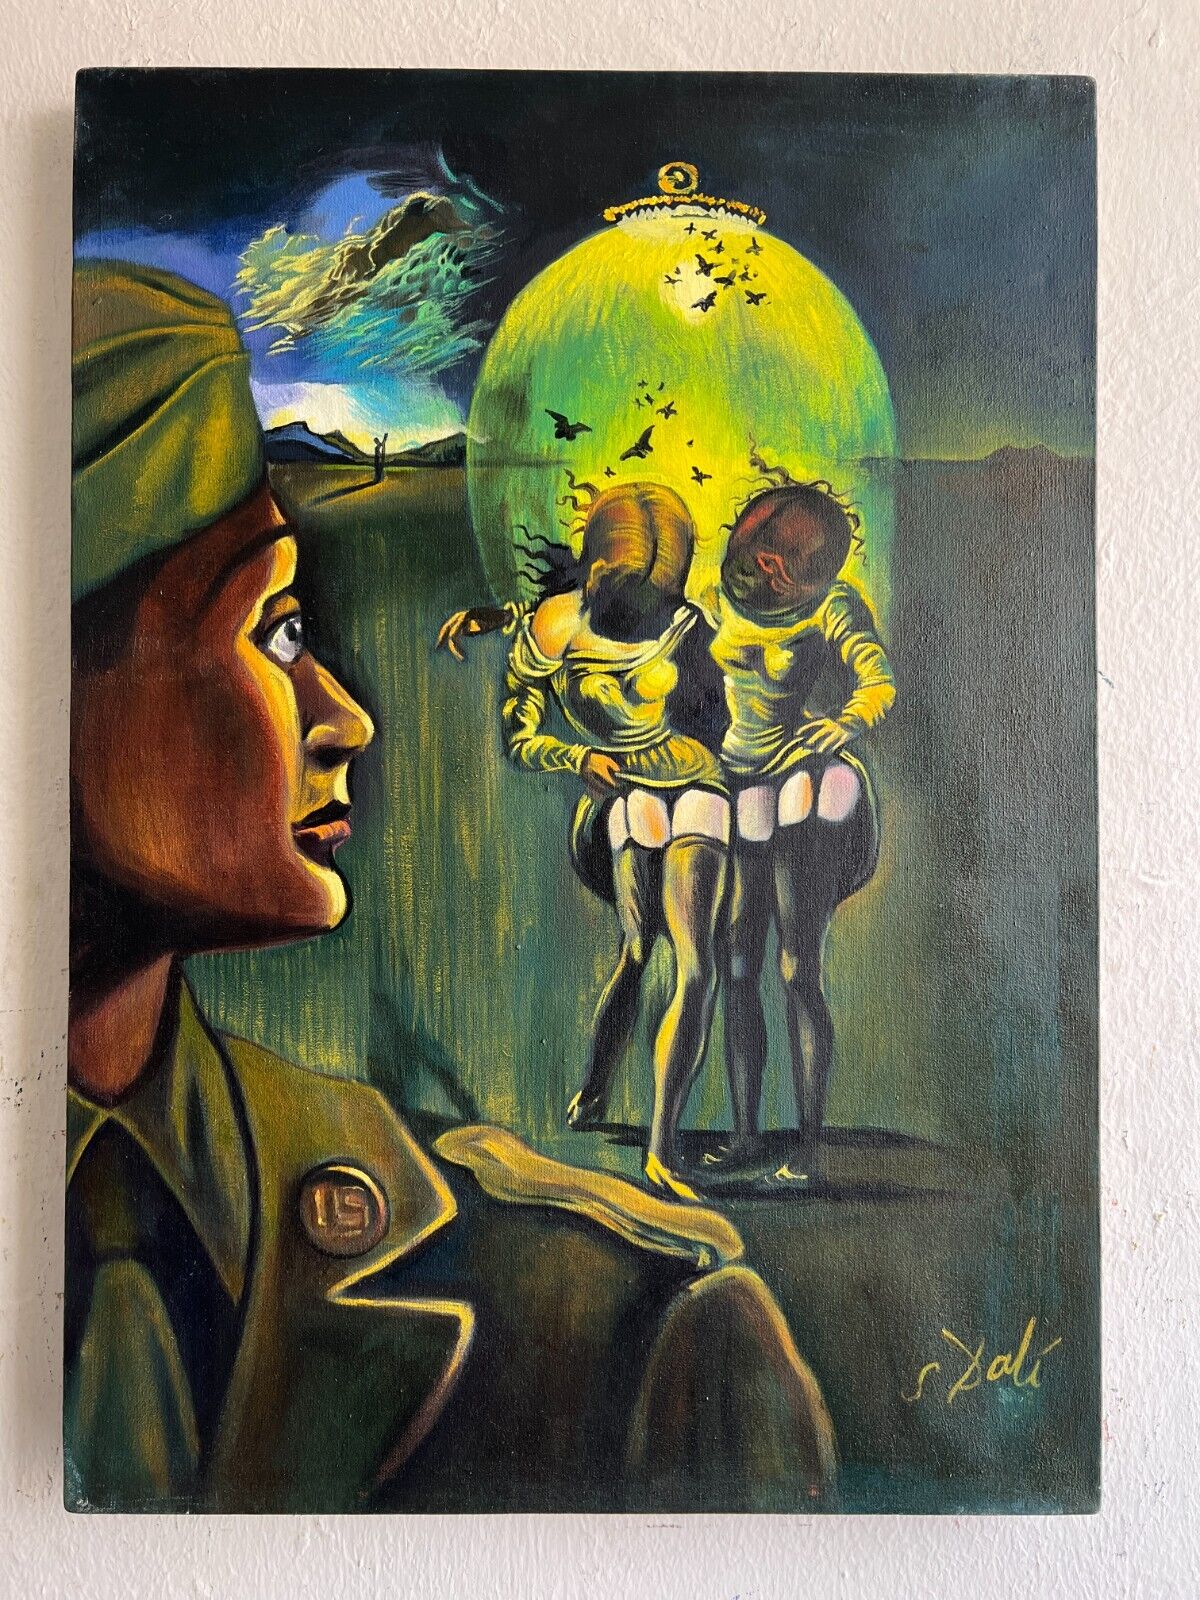 Salvador Dali (Handmade) Oil Painting on canvas signed & stamped